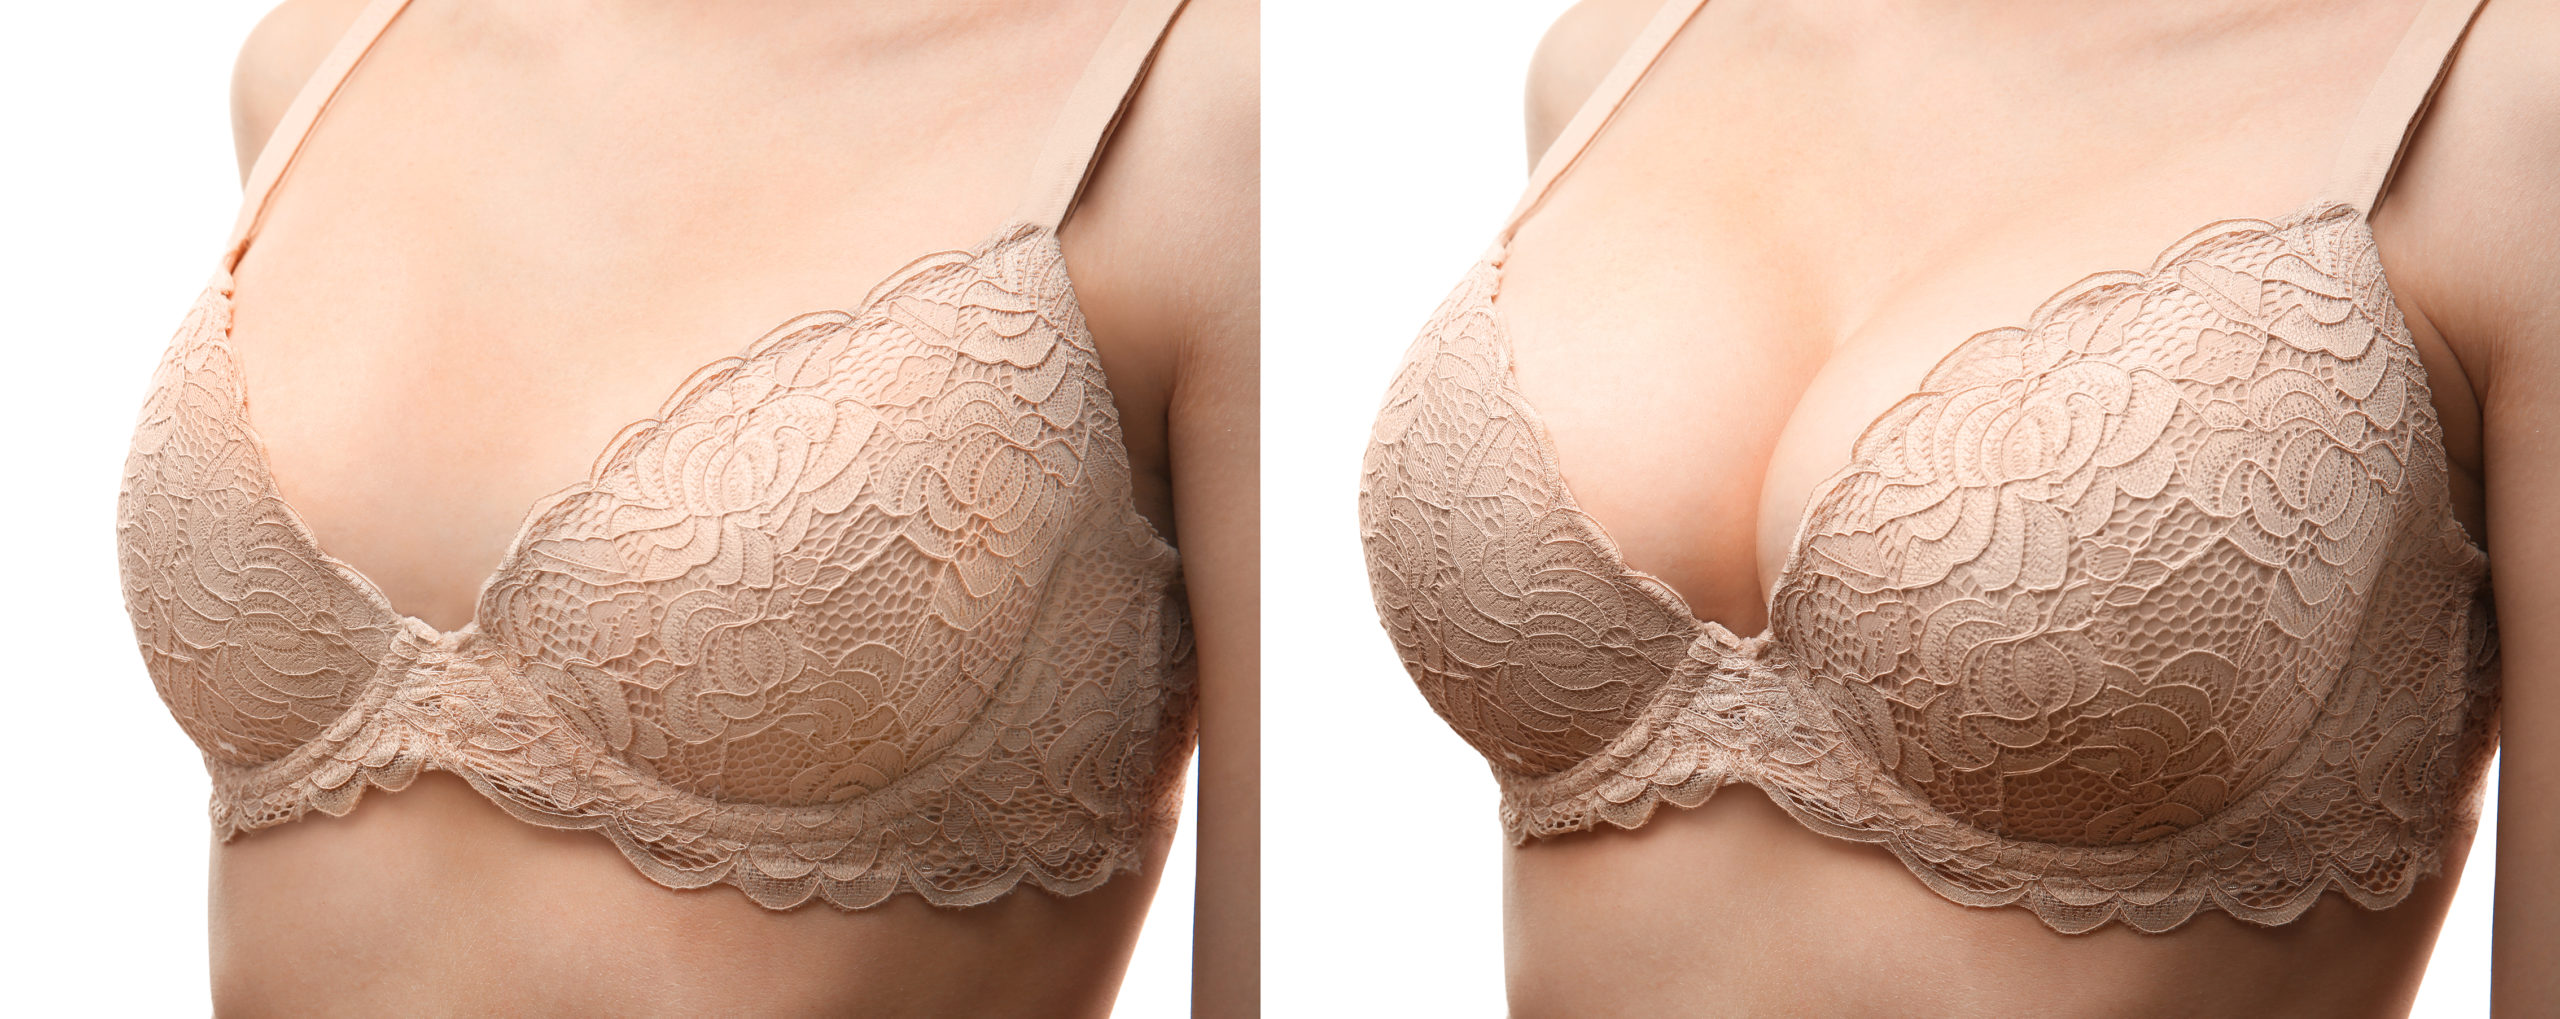 What Can You NOT Do After Breast Augmentation?